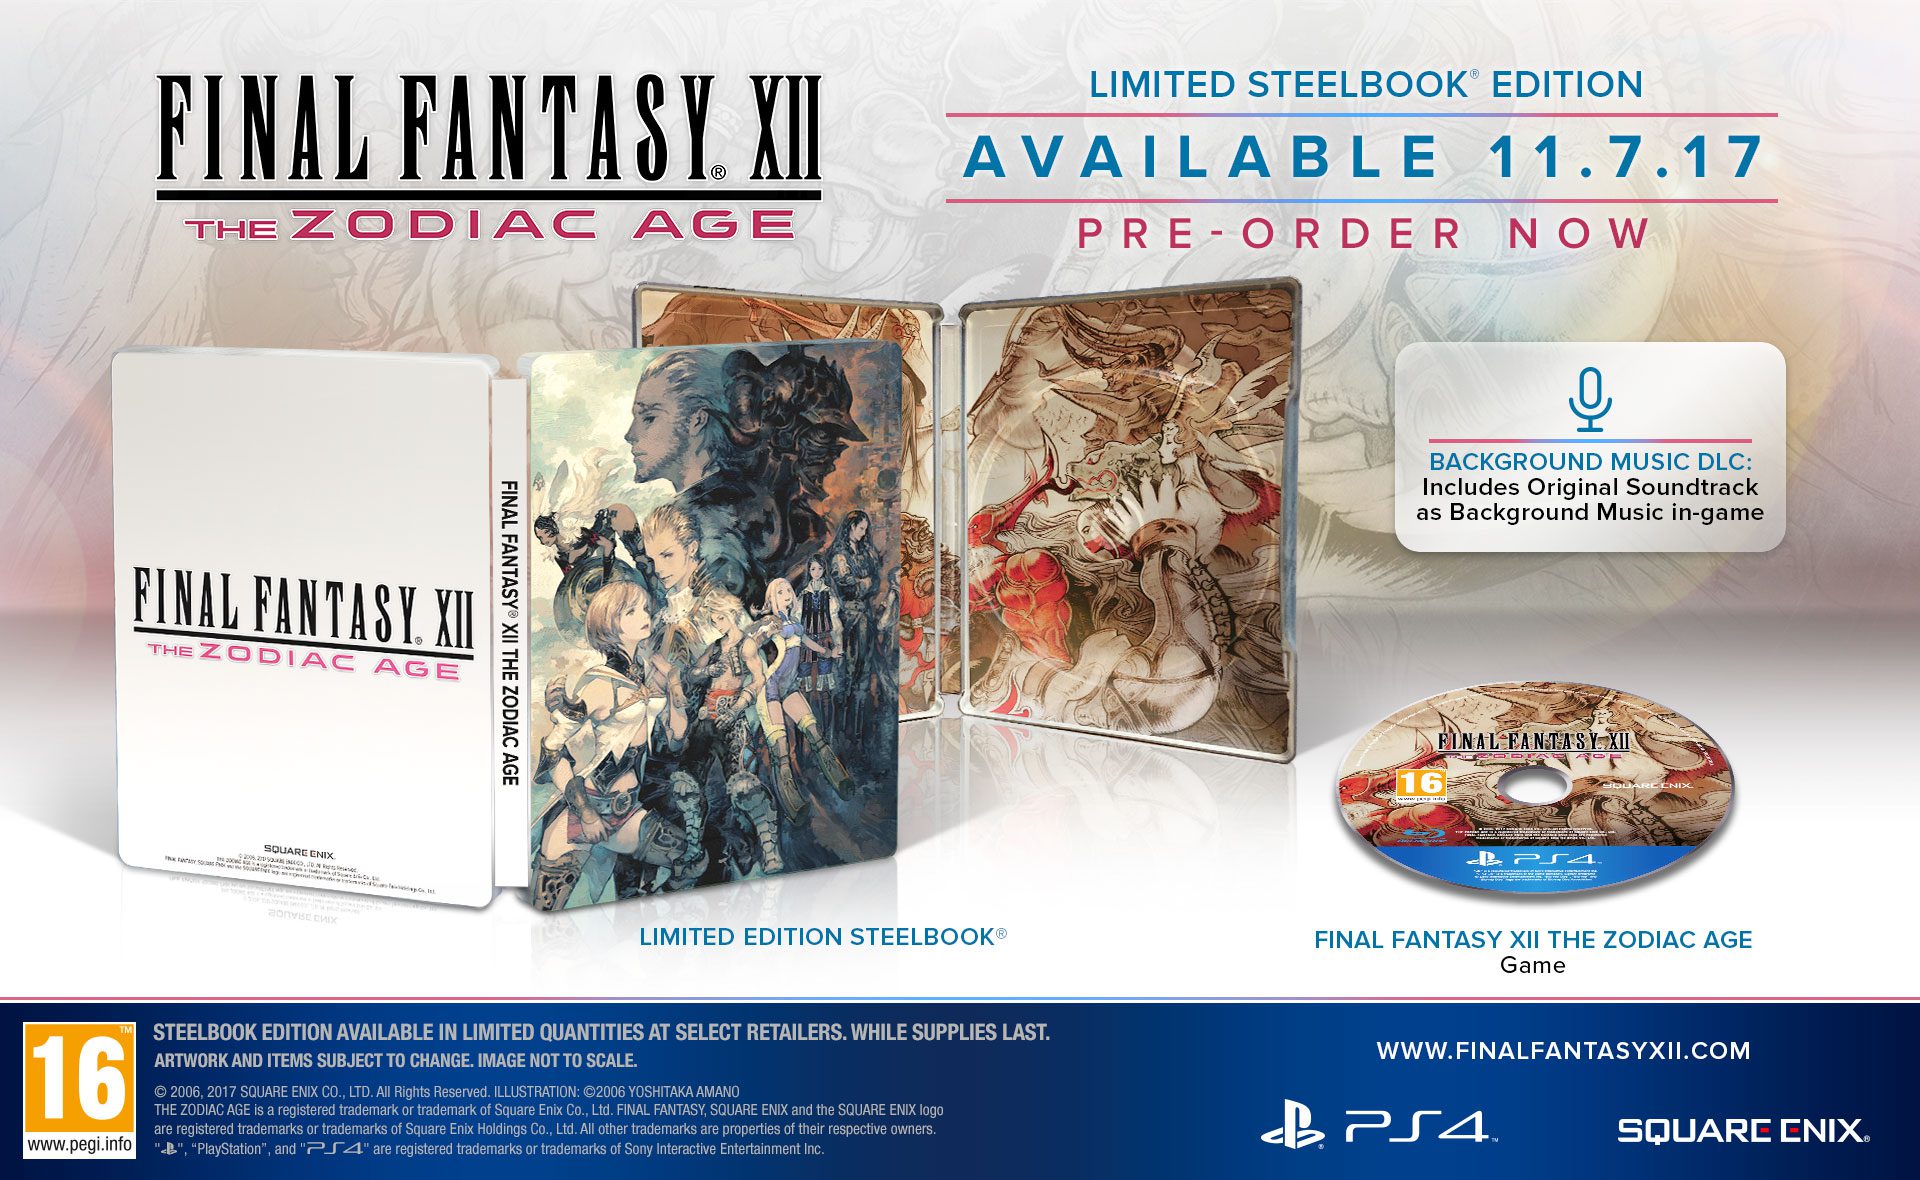 Final Fantasy XII The Zodiac Age Collector’s and Limited Editions unveiled